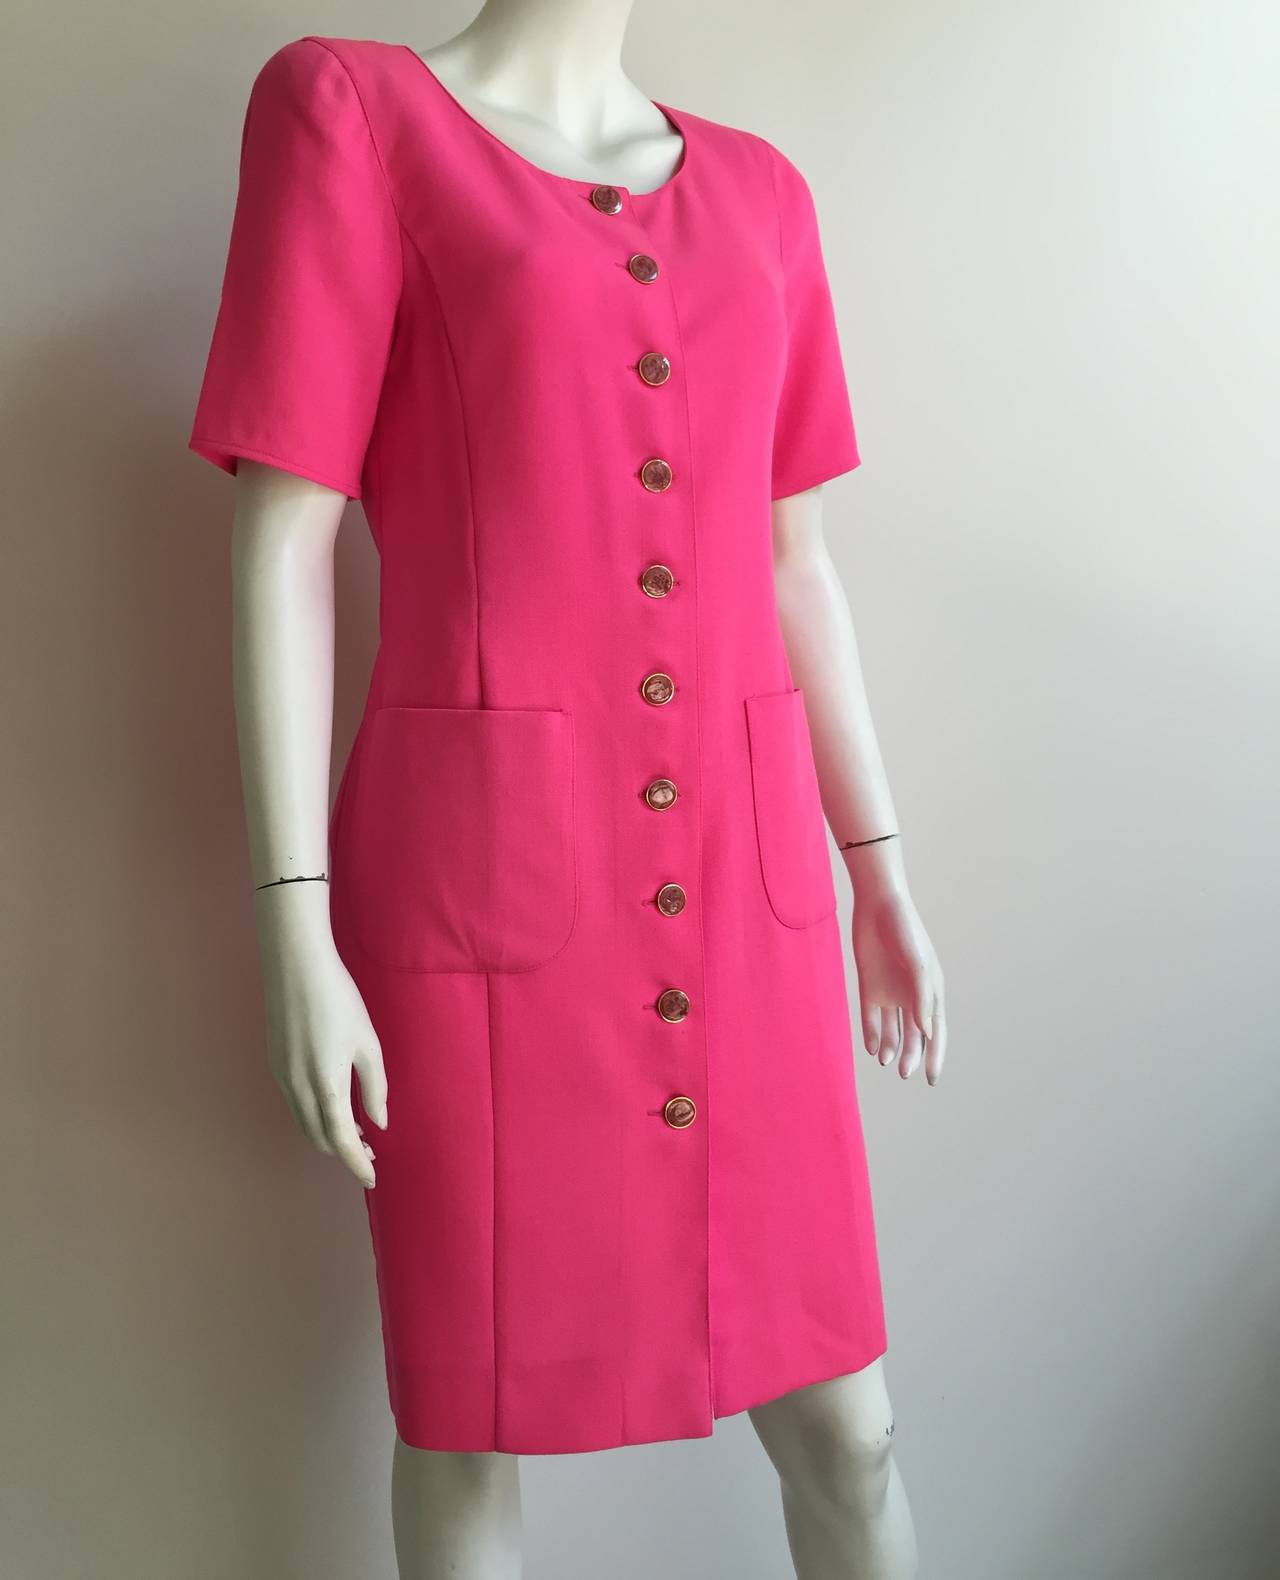 Ungaro solo donna 1980s pink wool button up dress with 2 front pockets made in Italy and size 8 / 40 ( please see and use measurements). 
Measurements are:
35" bust
31" waist
36" hips
10.5" sleeve length
39" dress